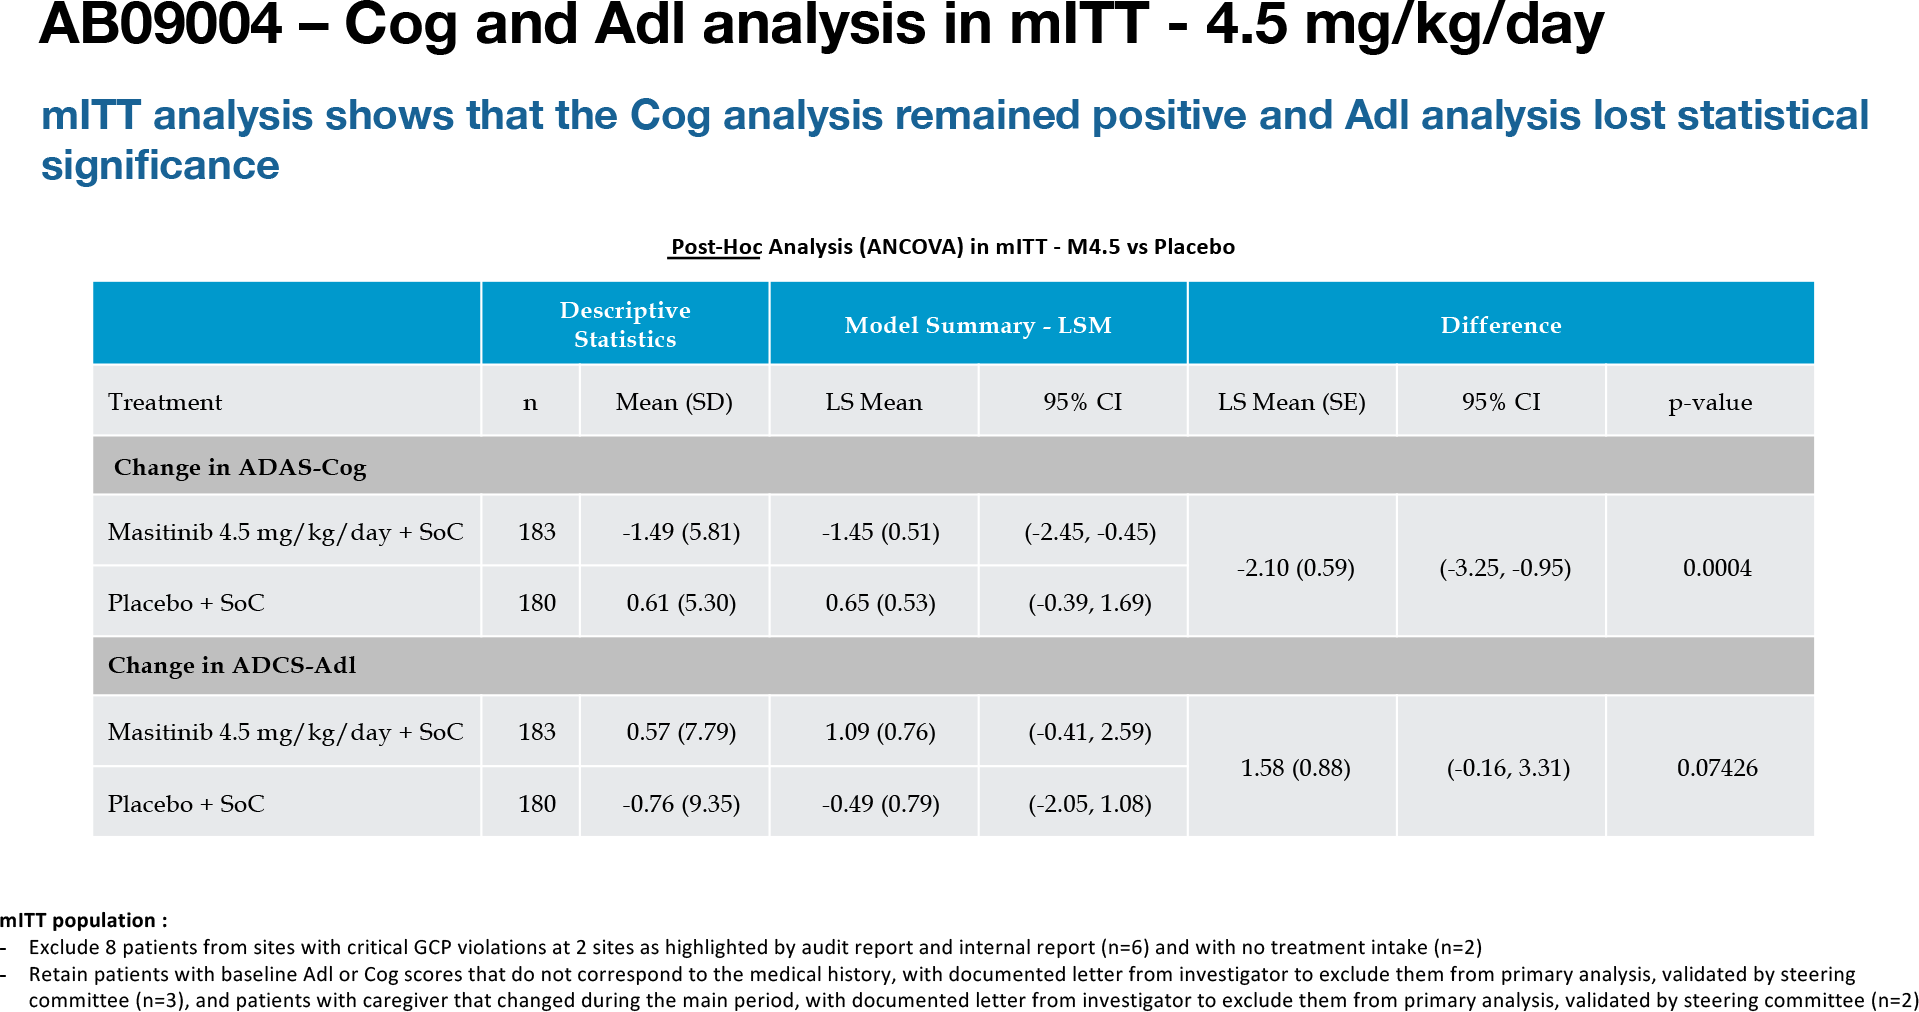 nct01872598 results 05 - Masitinib for Alzheimer’s Disease: It Did Work!